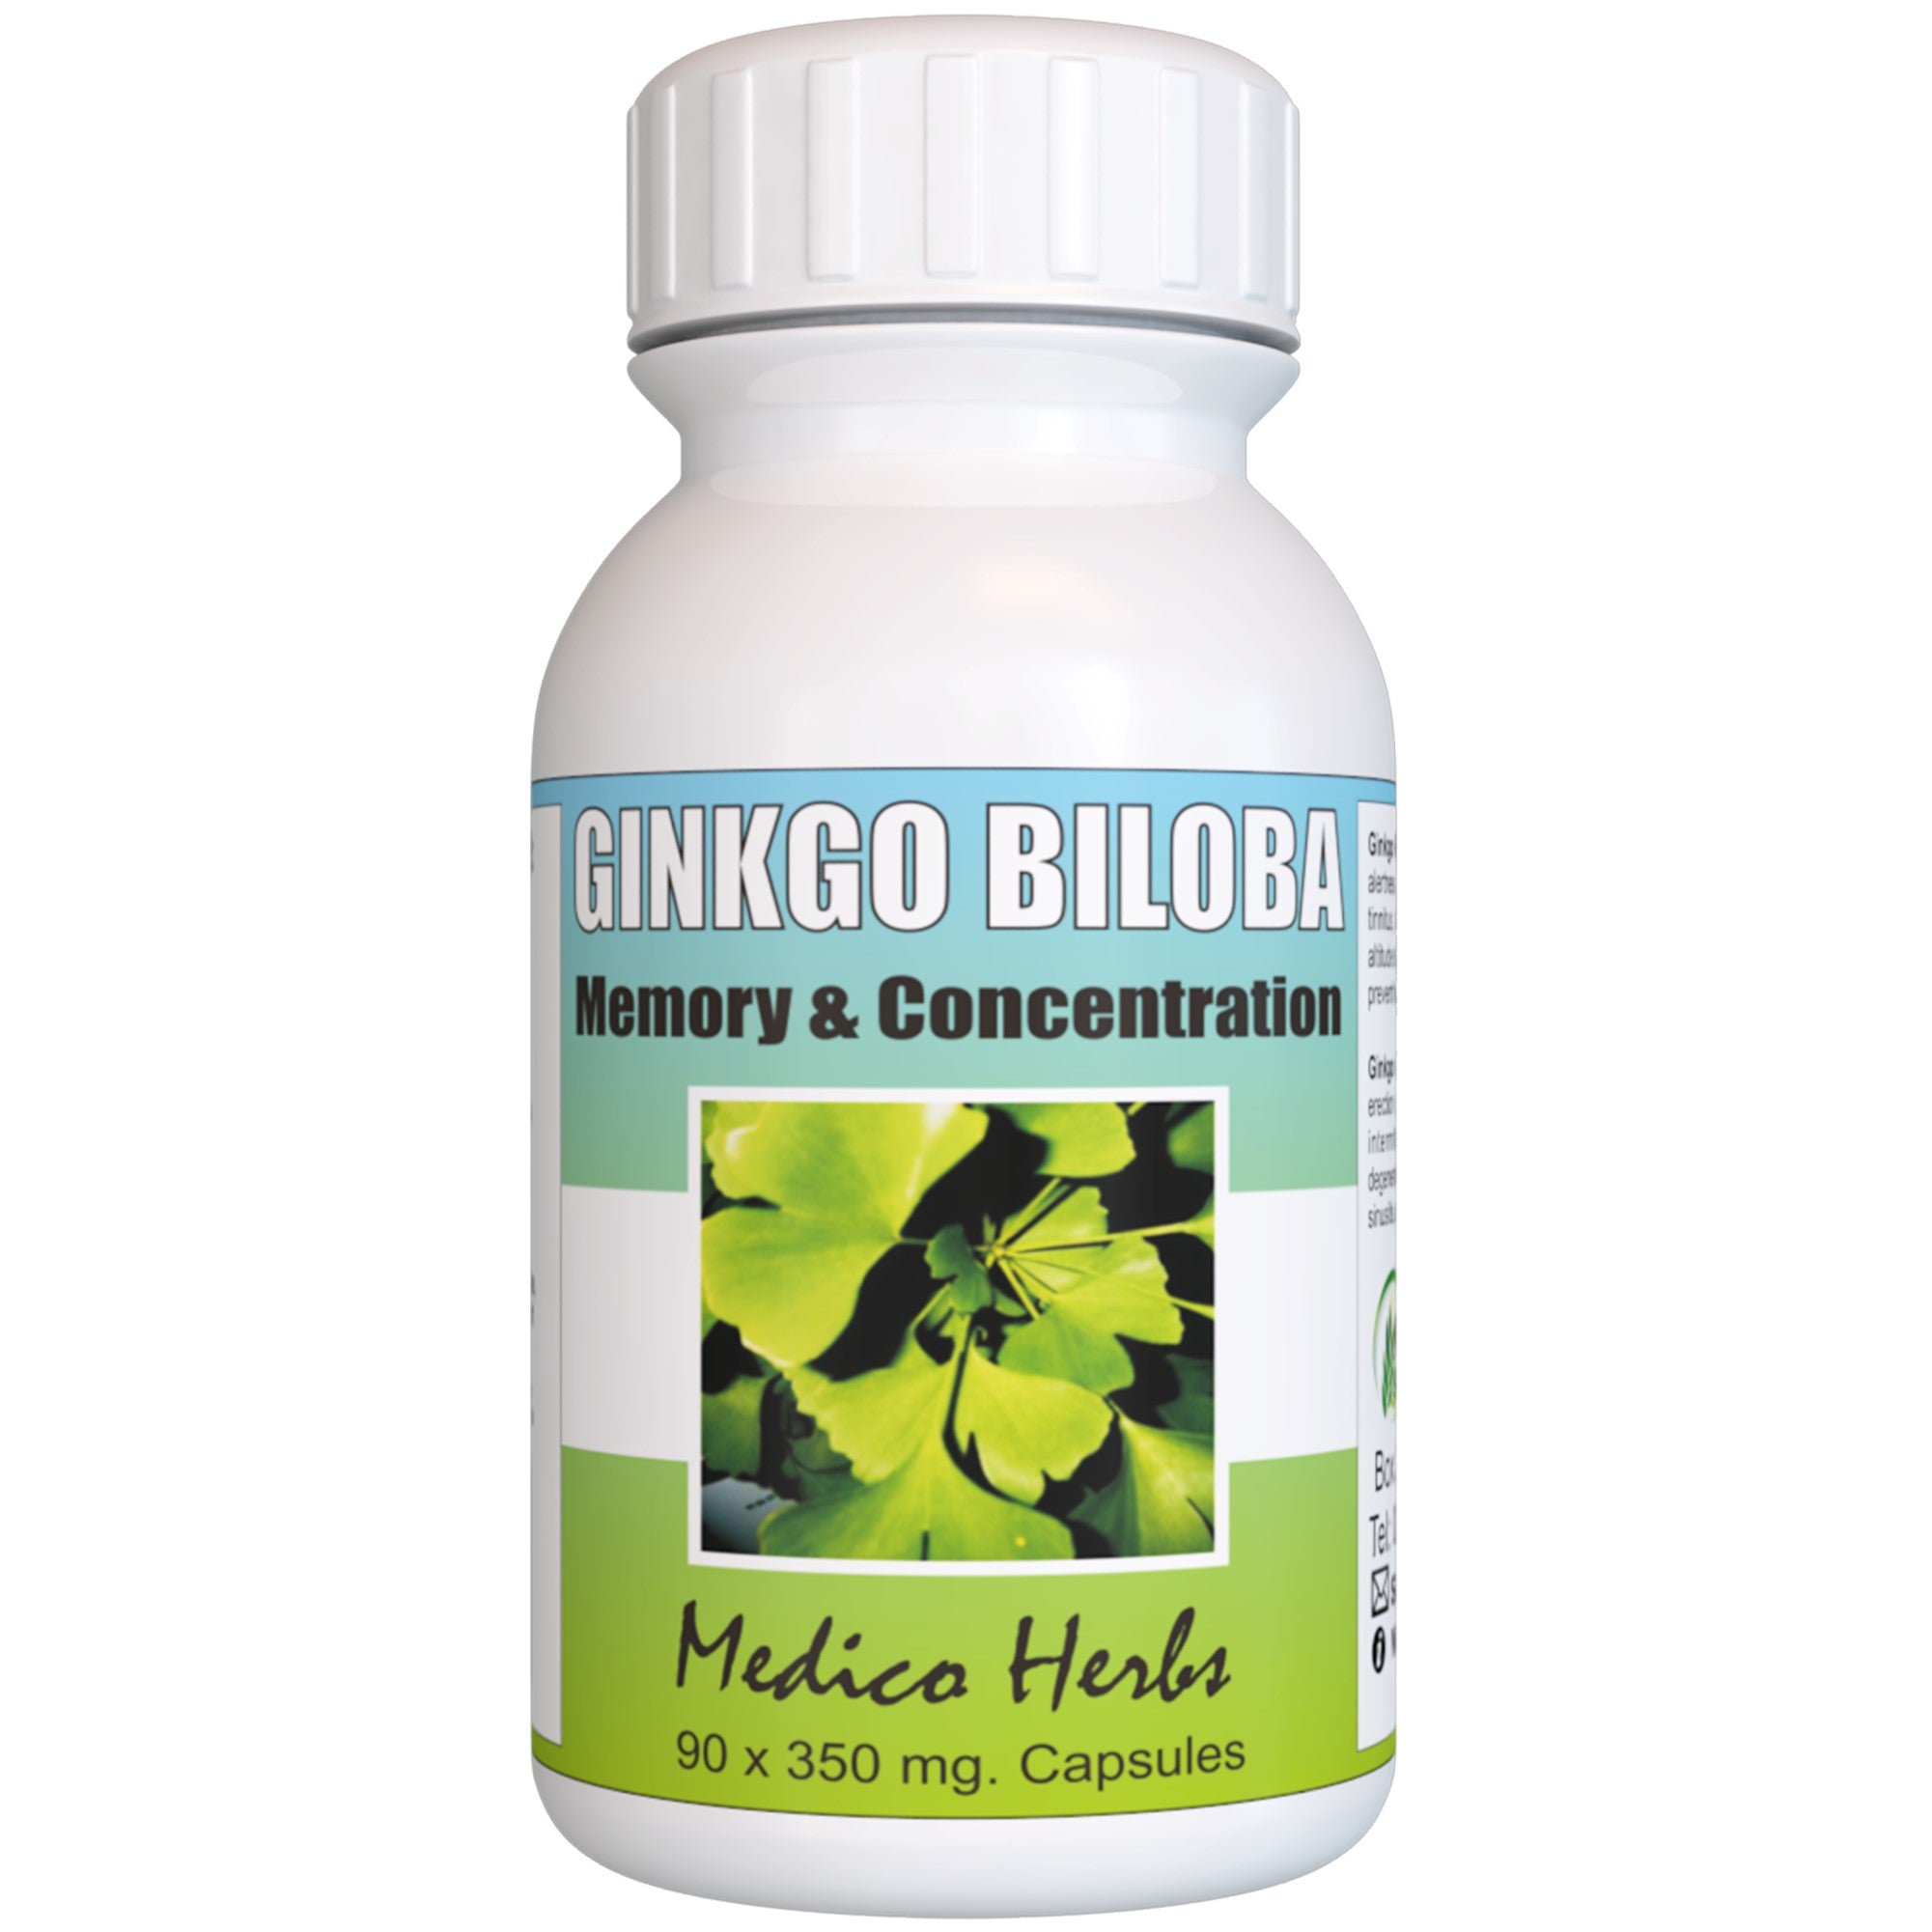 Ginkgo Biloba - Help reduce Memory Loss - 100% Natural  - Capsules 60x350mg x 3 bottles for the price of 2